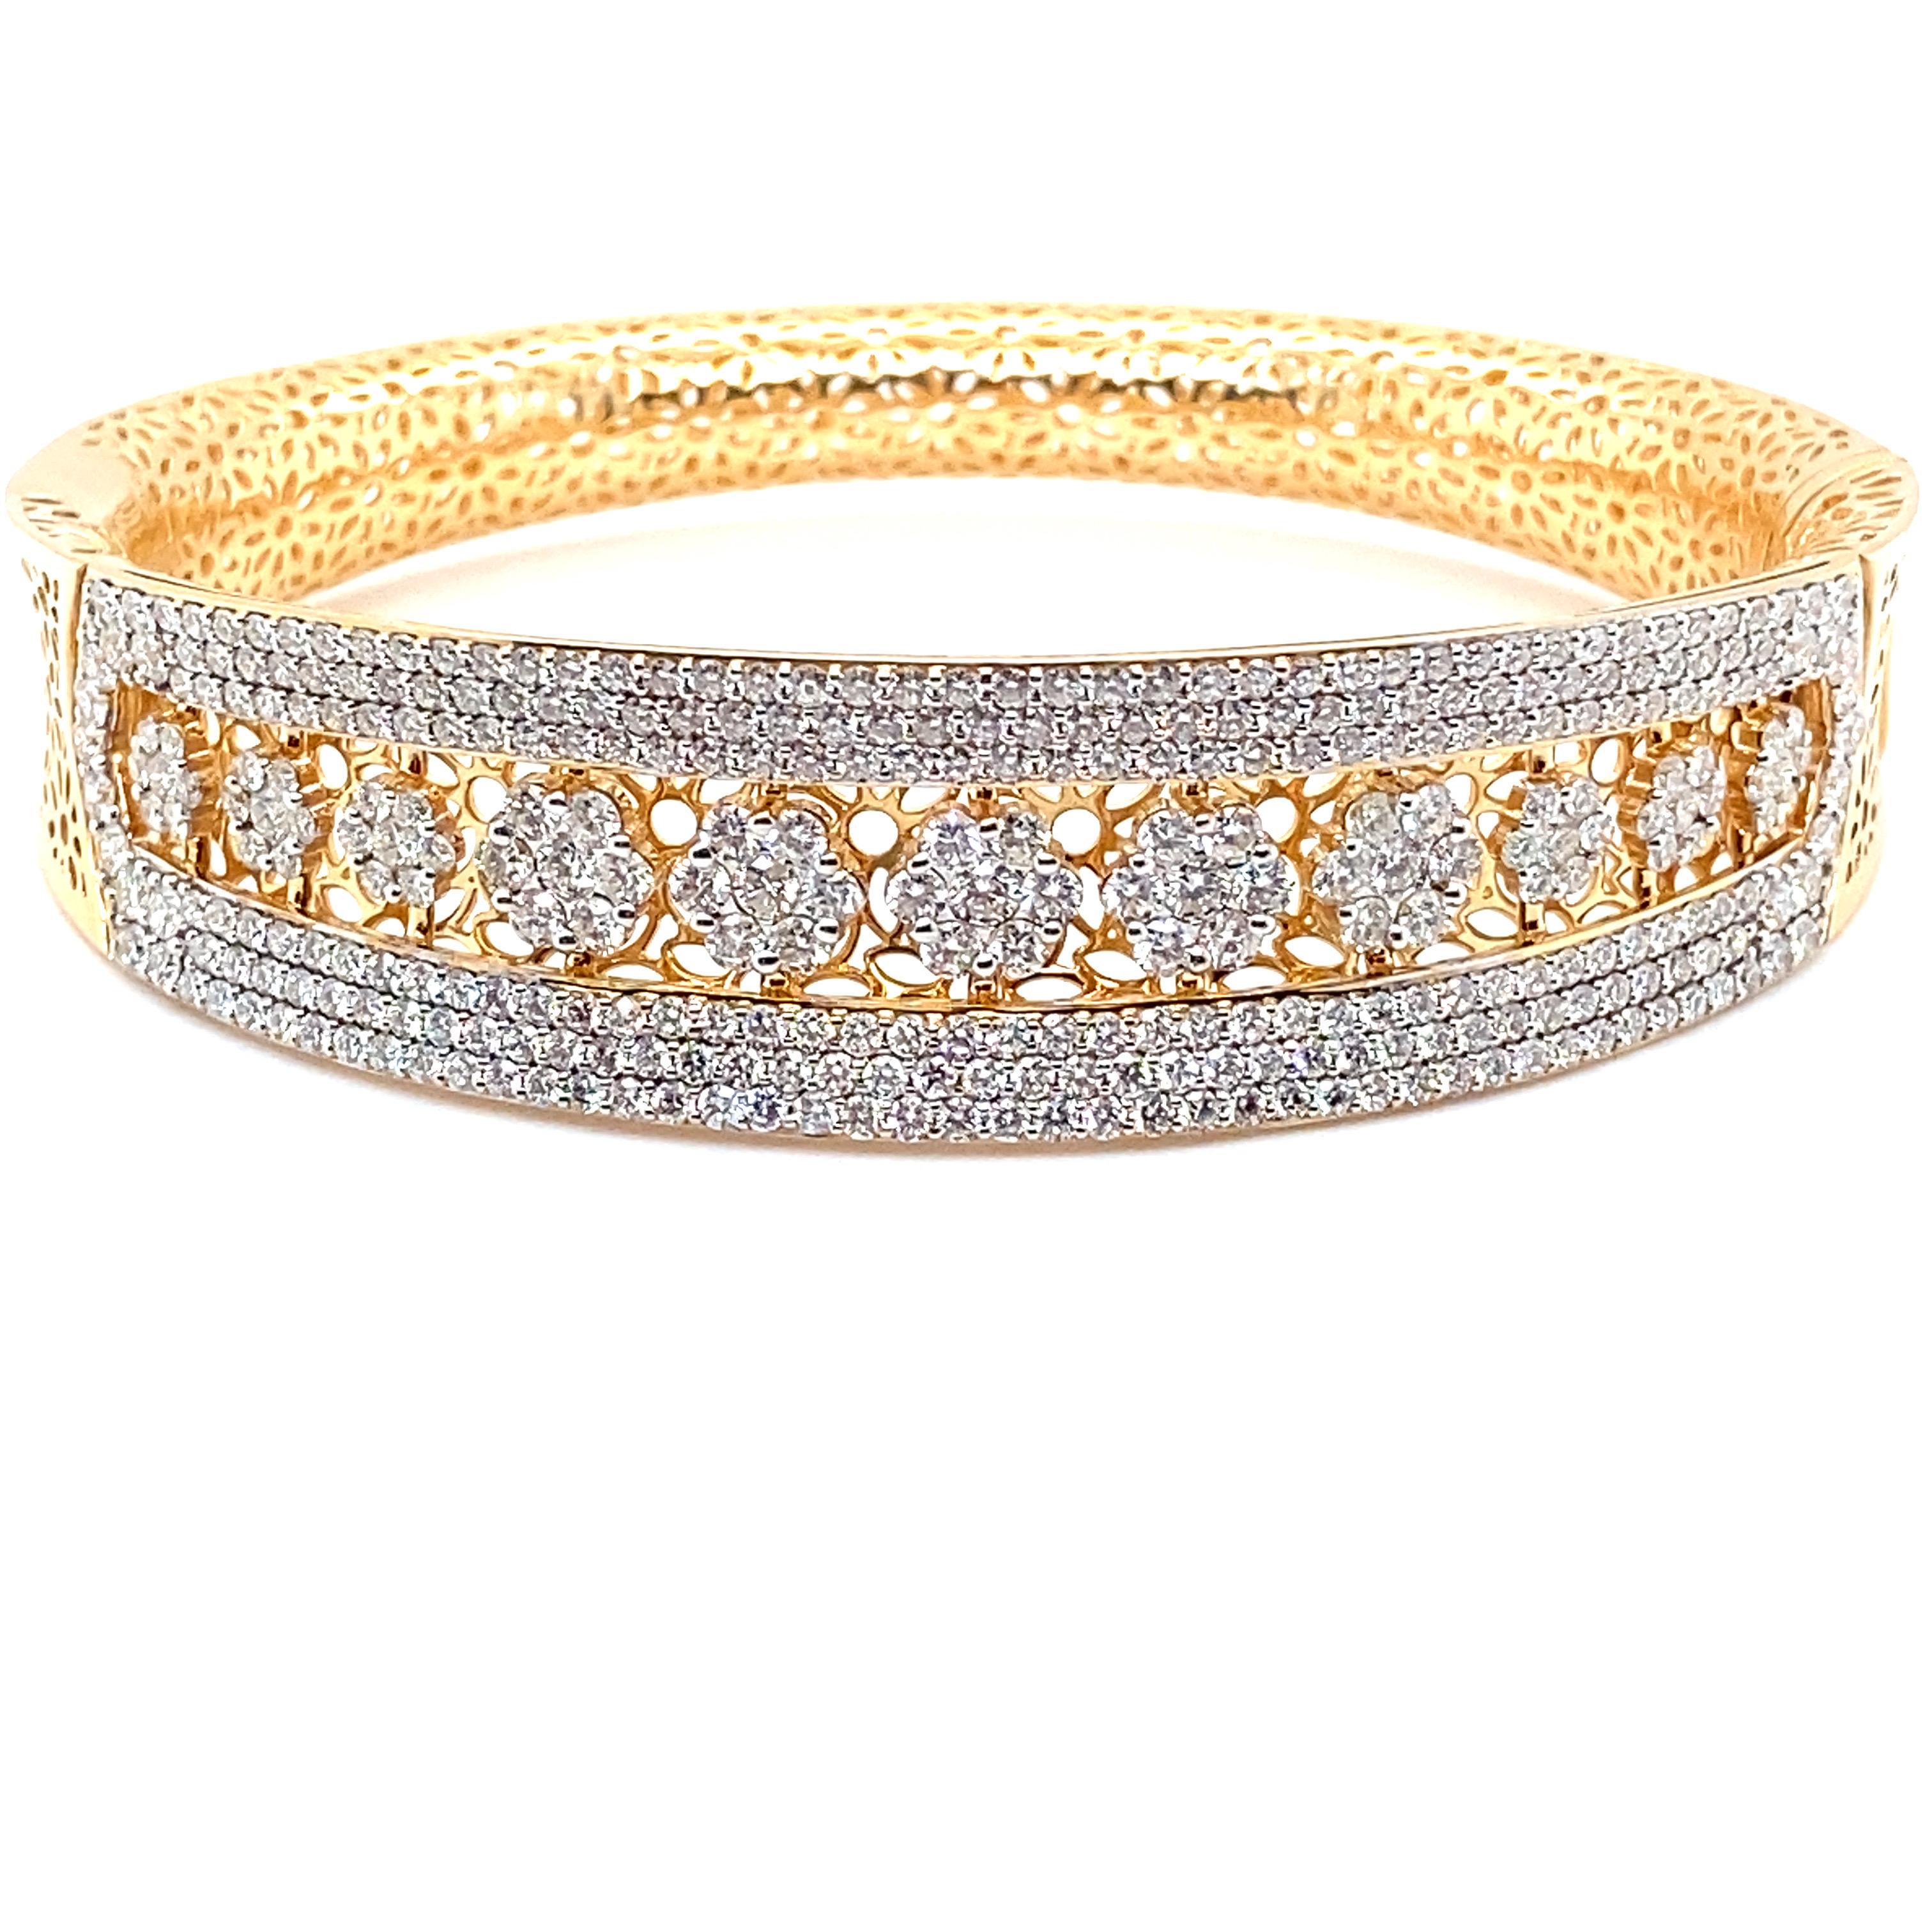 This 6.19 carat diamond cuff bracelet/bangle is beautifully crafted in 18K yellow gold. The upper half circular portion of the bangle has the detail work of white diamonds. This openable bangle has full under gallery which can be seen in the images.